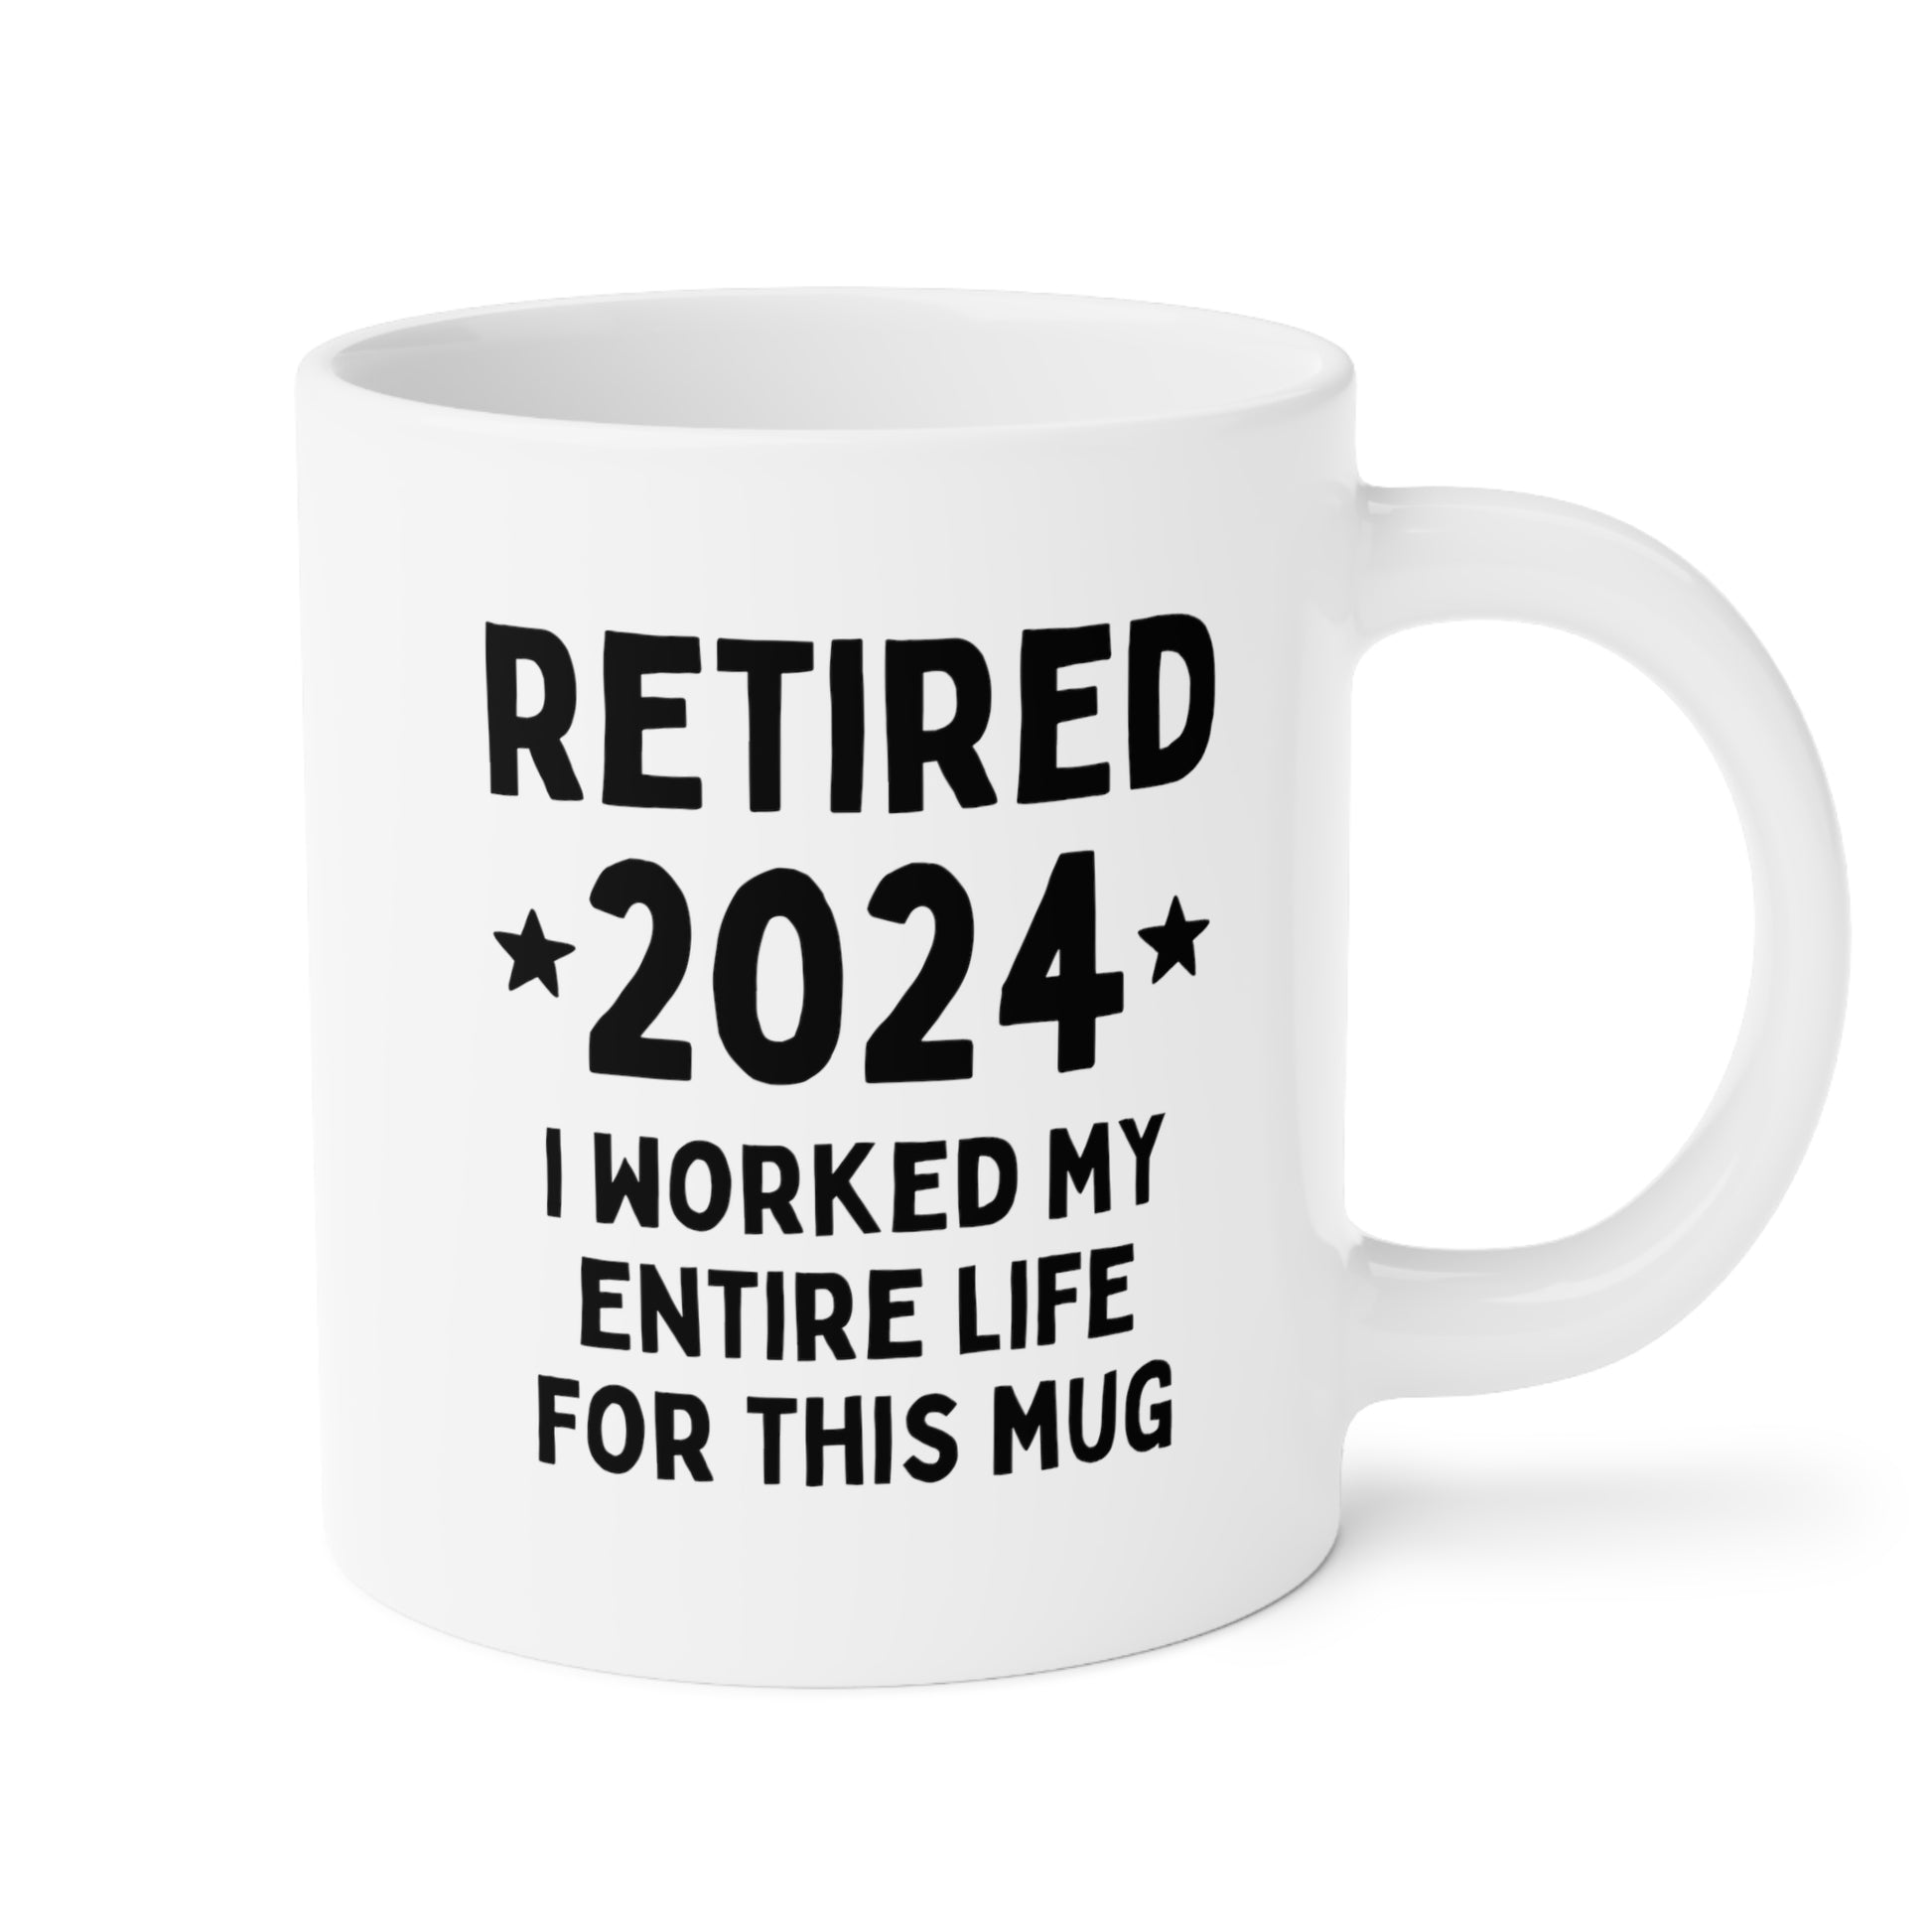 Retired 2024 I Worked My Entire Life For This Mug 20oz white funny large coffee mug gift for retirement man woman waveywares wavey wares wavywares wavy wares